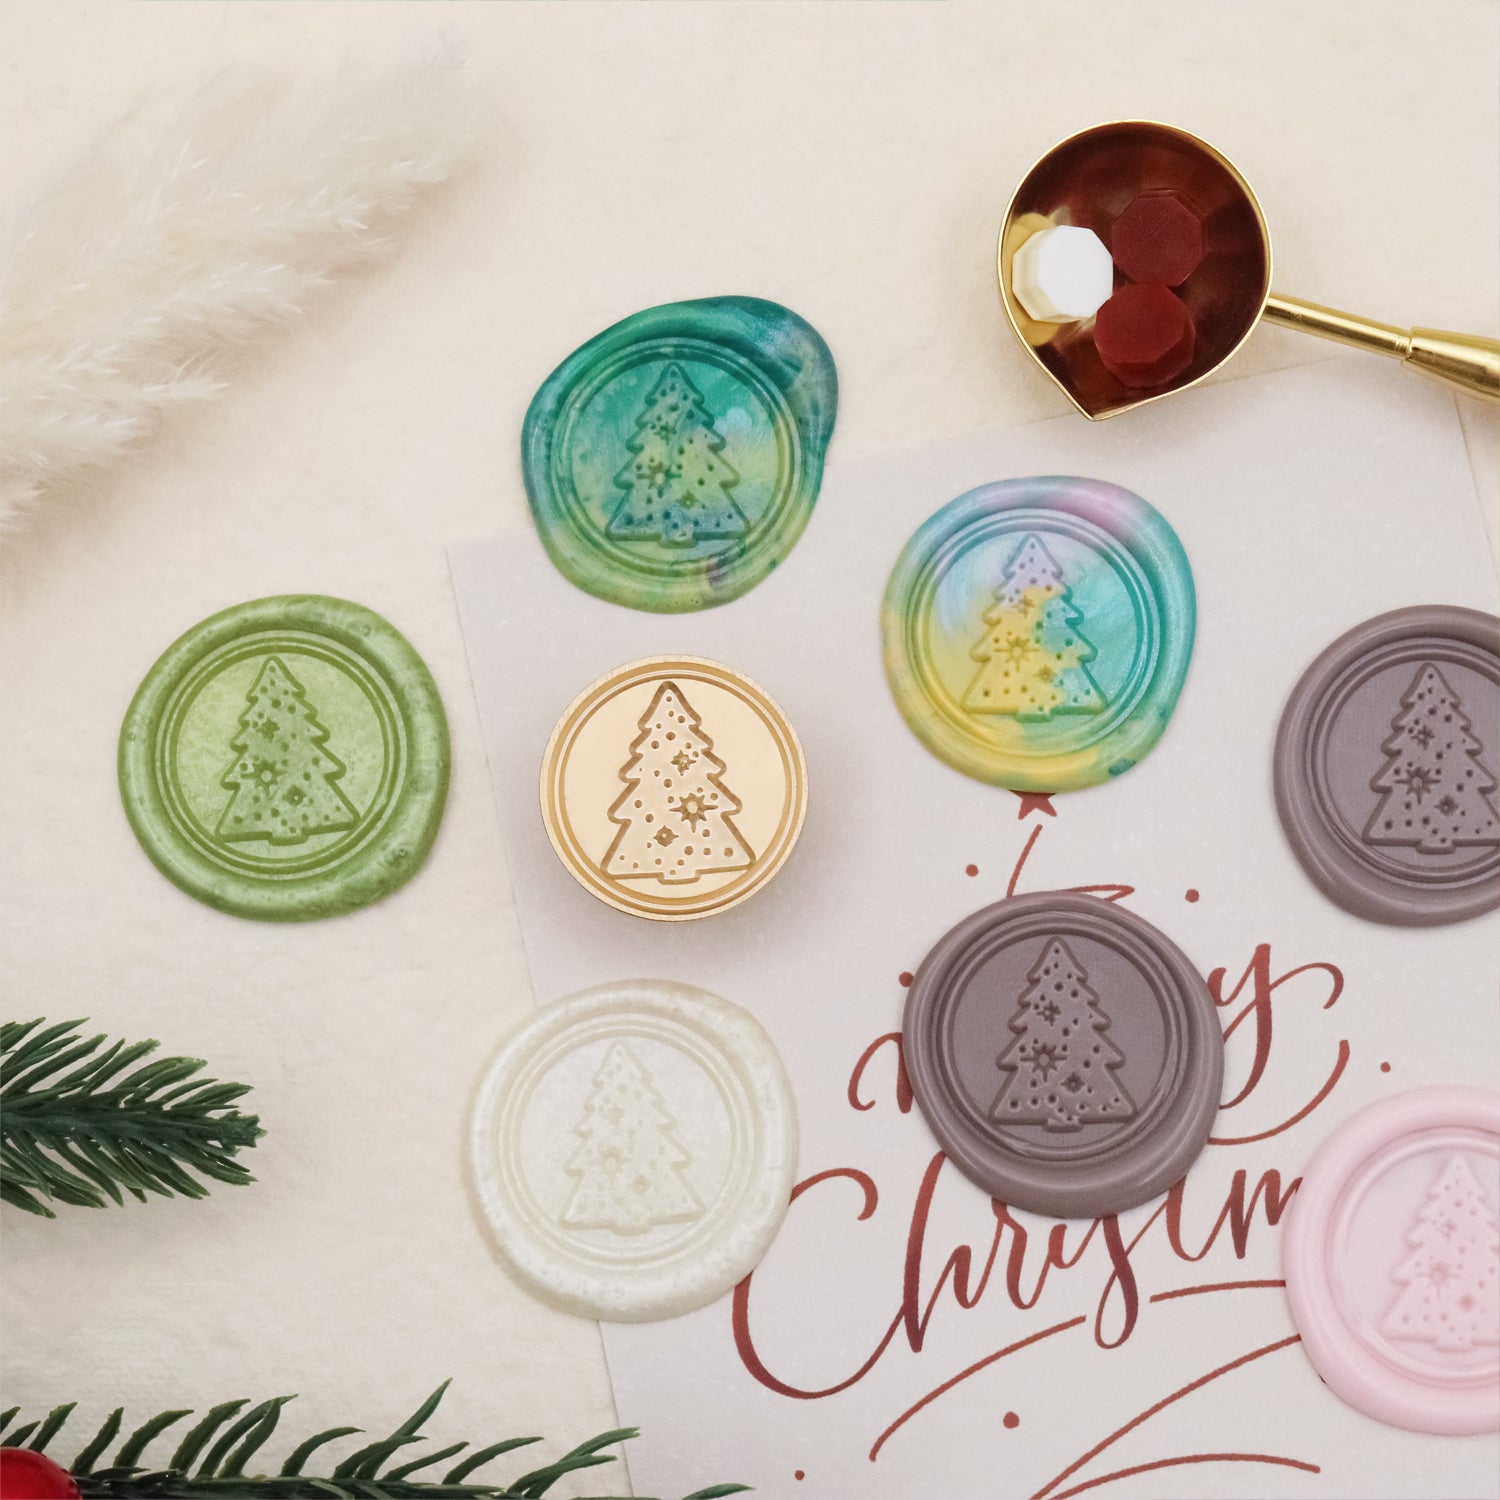 Ready Made Wax Seal Stamp - Christmas Gifts Wax Seal Stamp